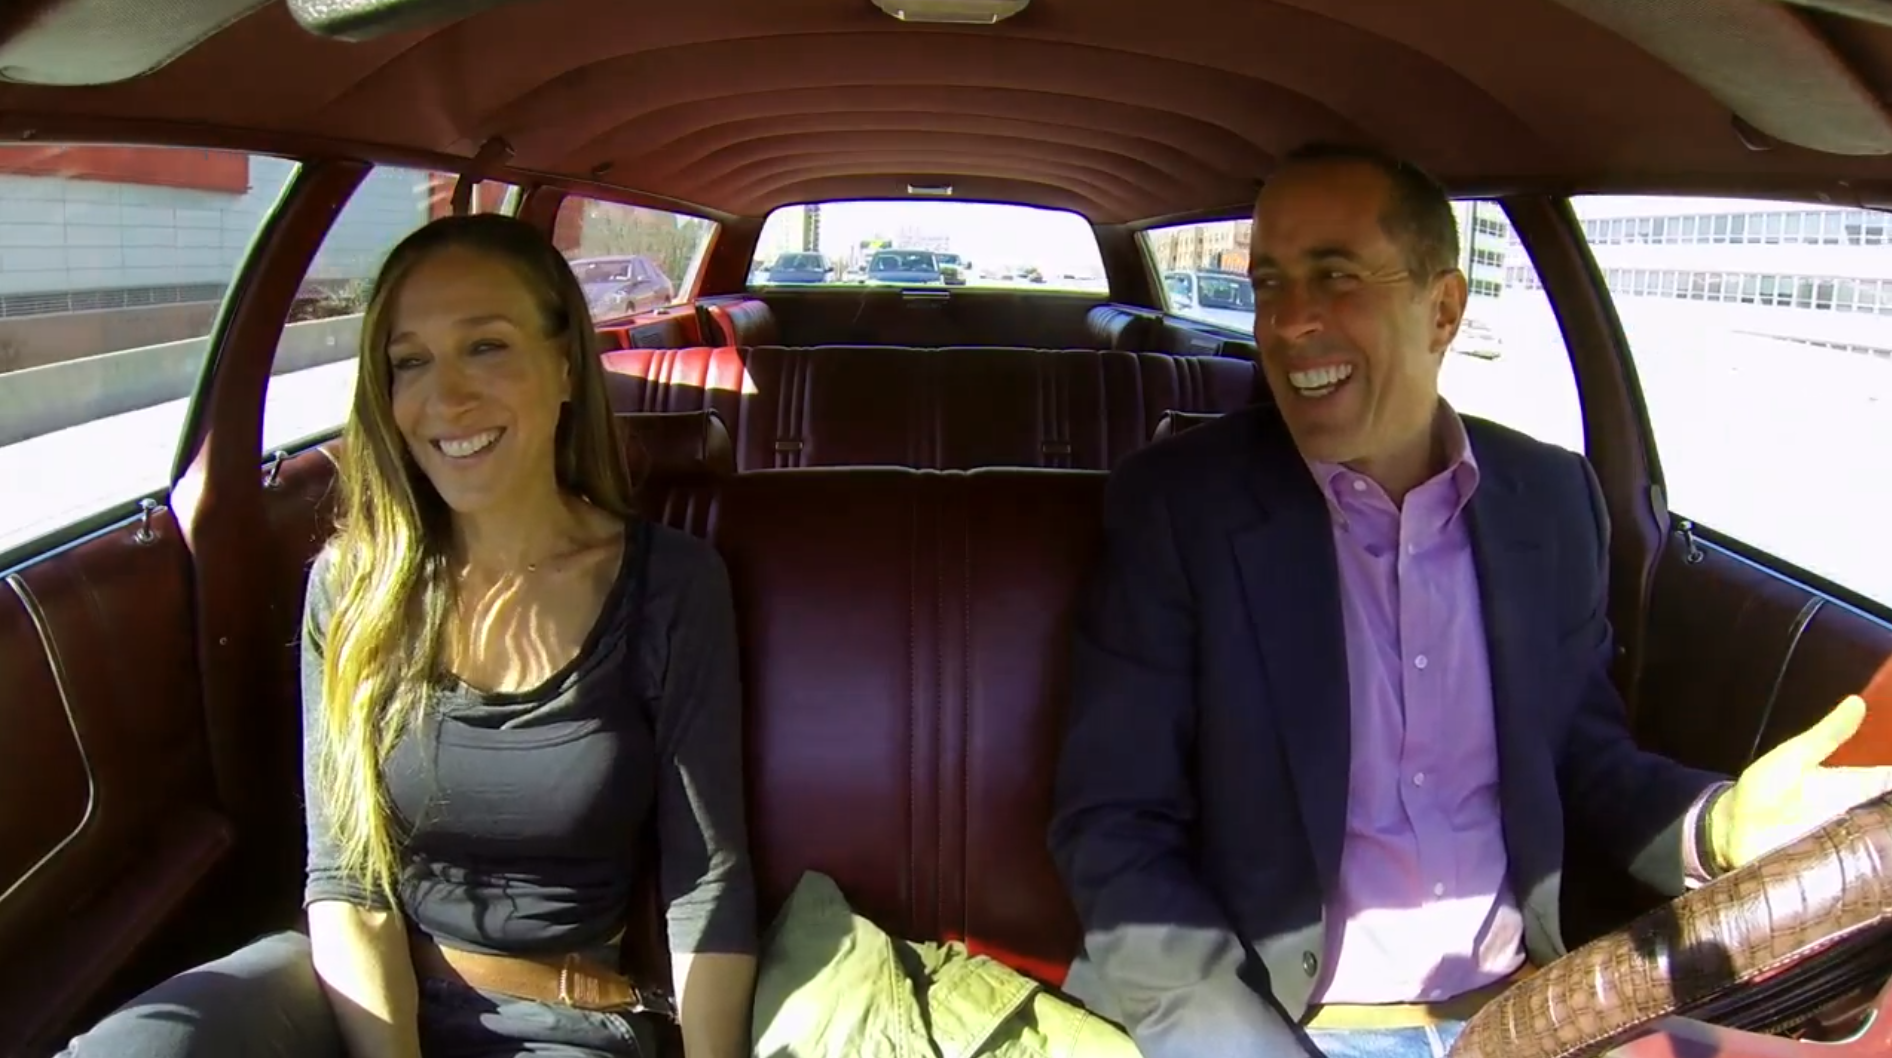 He got of the car. Comedians in cars getting Coffee. Джерри Форд жена. Comedians in cars getting Coffee Sarah Jessica Parker. Take car and get a car разница.